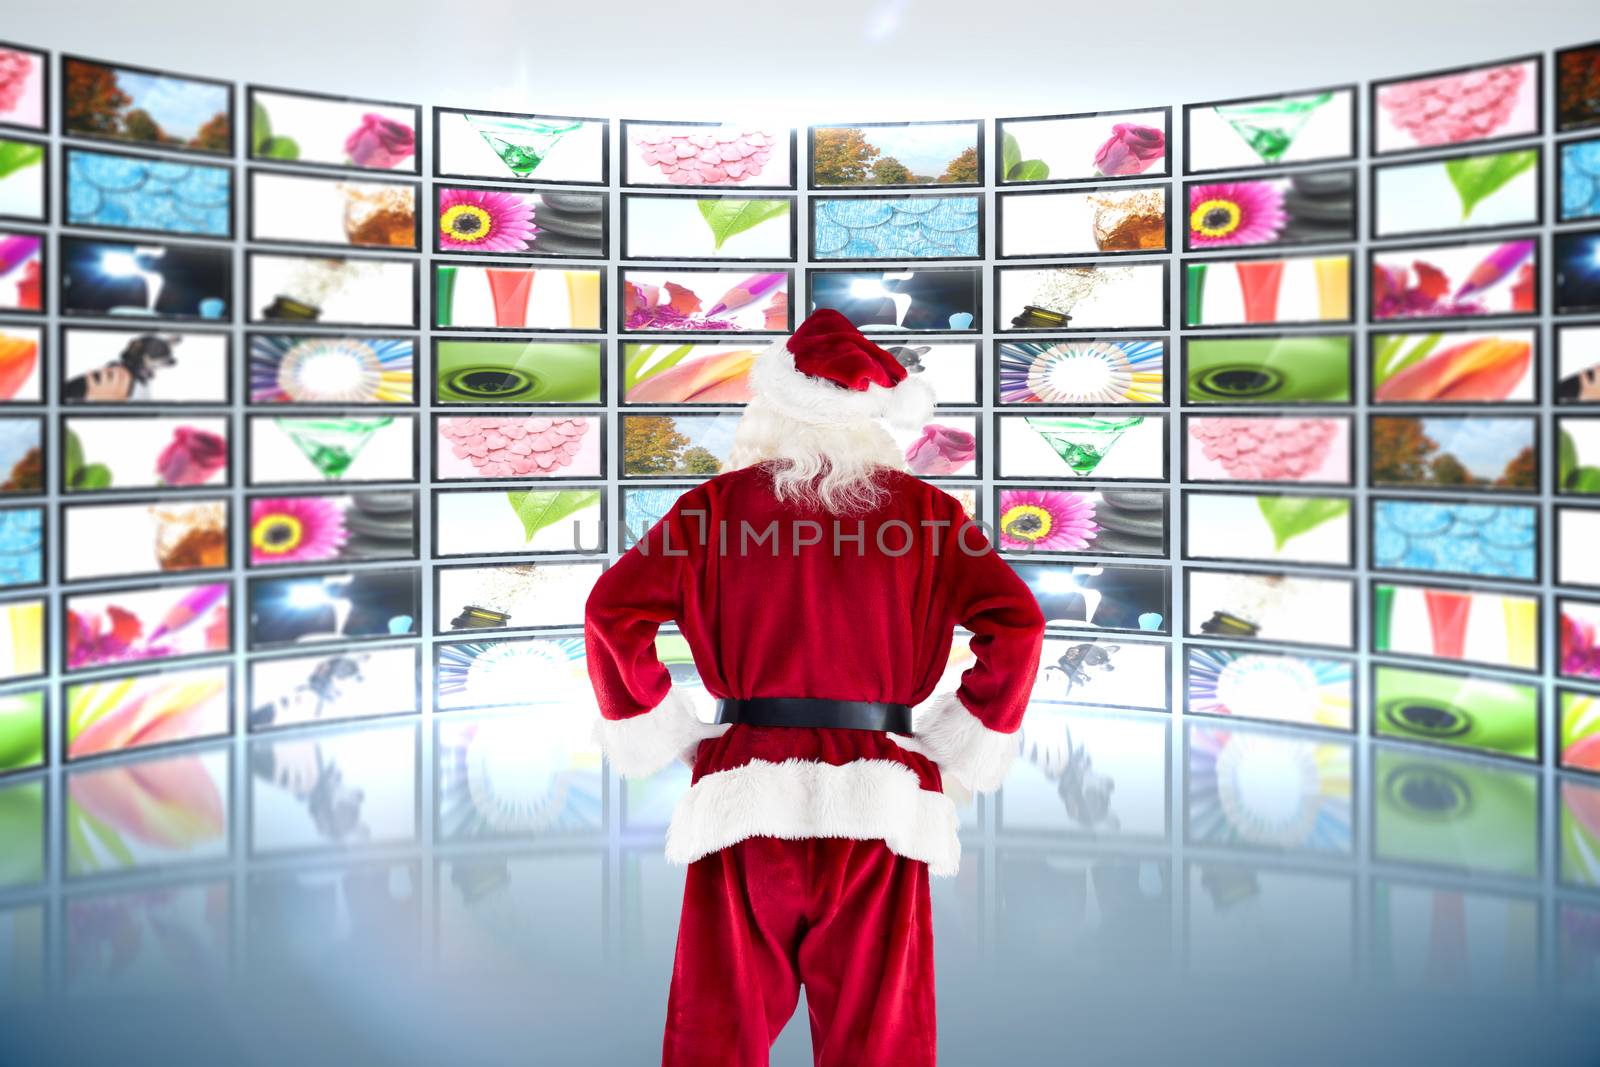 Santa Claus against screen collage showing lifestyle images